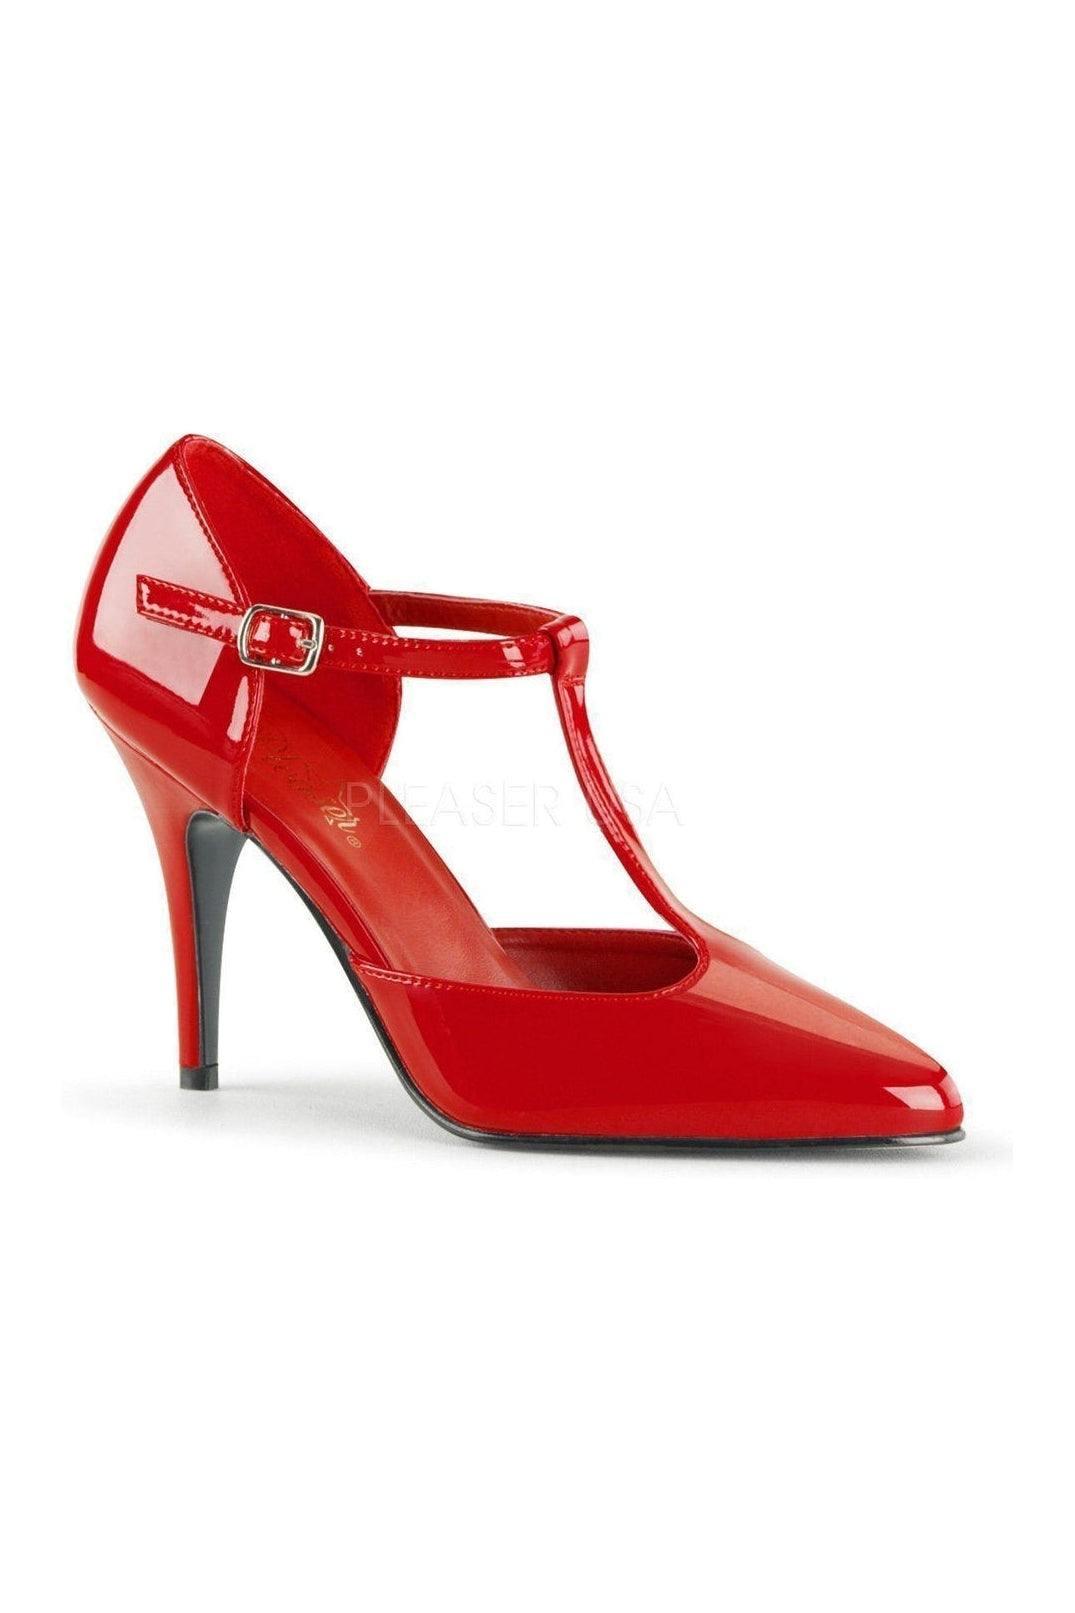 VANITY-415 Pump | Red Patent-Pleaser-Red-D'Orsays-SEXYSHOES.COM